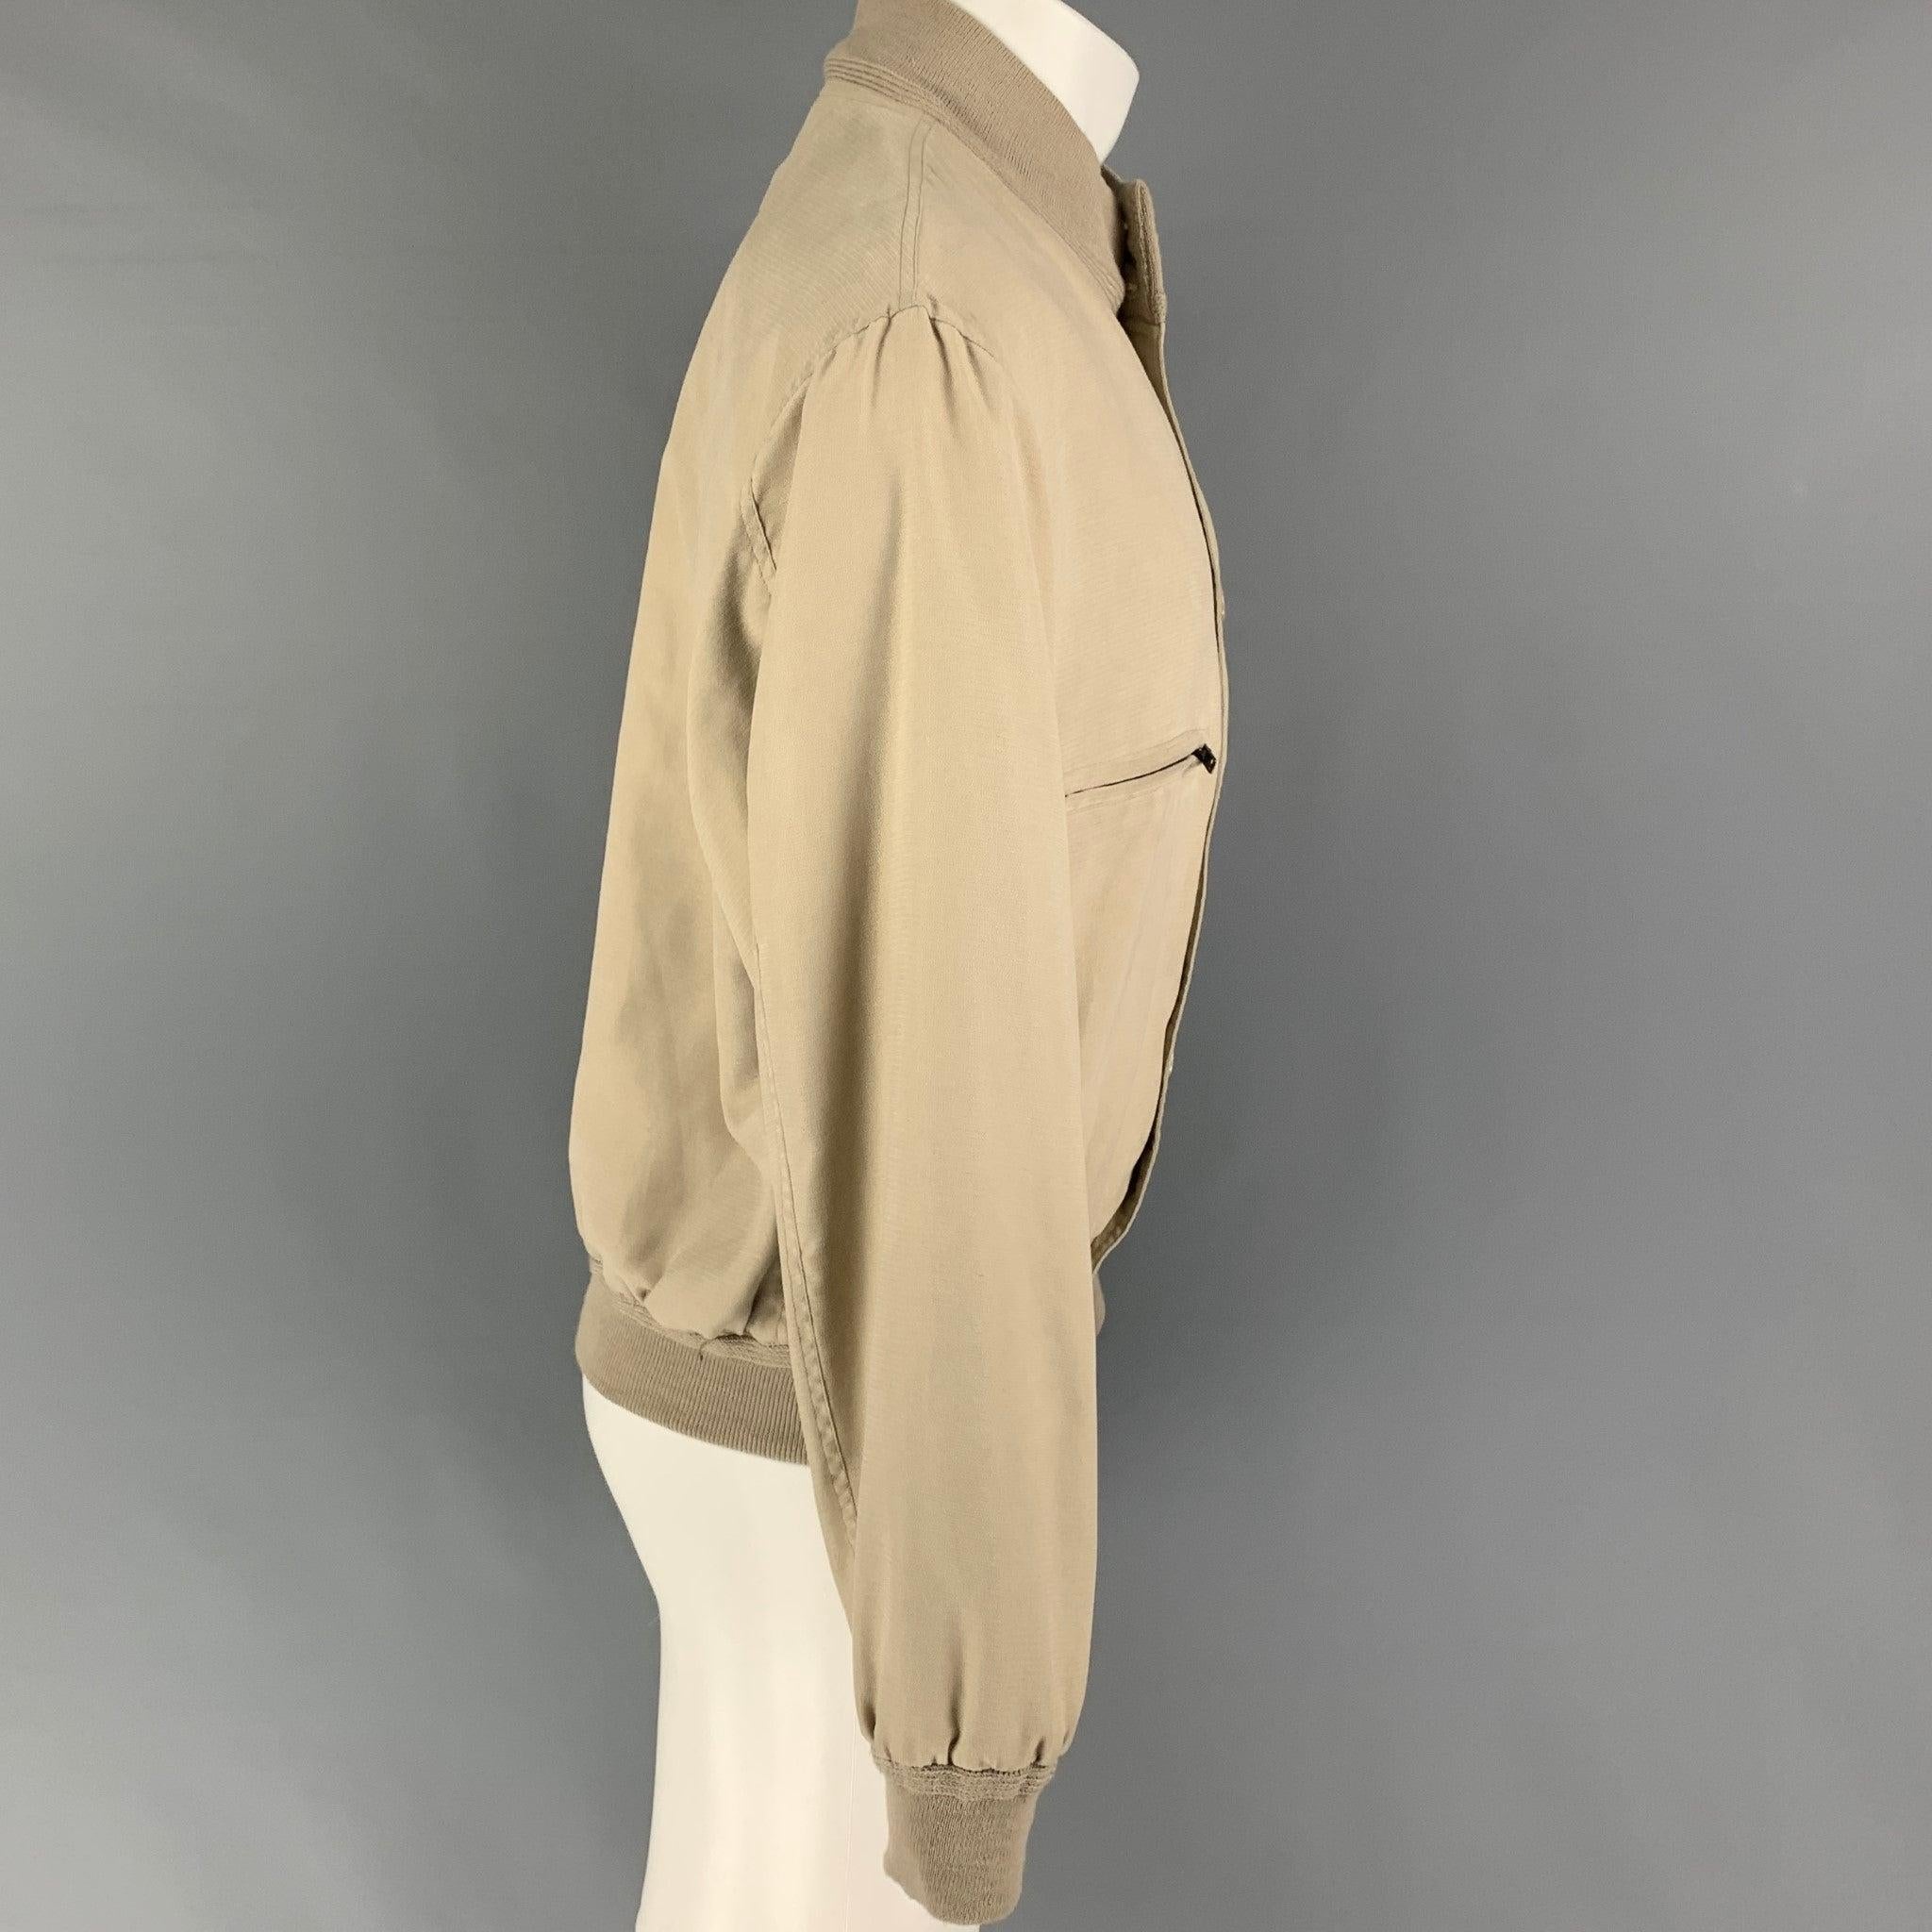 GIORGIO ARMANI jacket comes in a beige polyester featuring a bomber style, ribbed hem, zipper pockets, and a buttoned closure. Made in Italy.
Good
Pre-Owned Condition. Moderate discoloration throughout.  

Marked:   38 

Measurements: 
 
Shoulder: